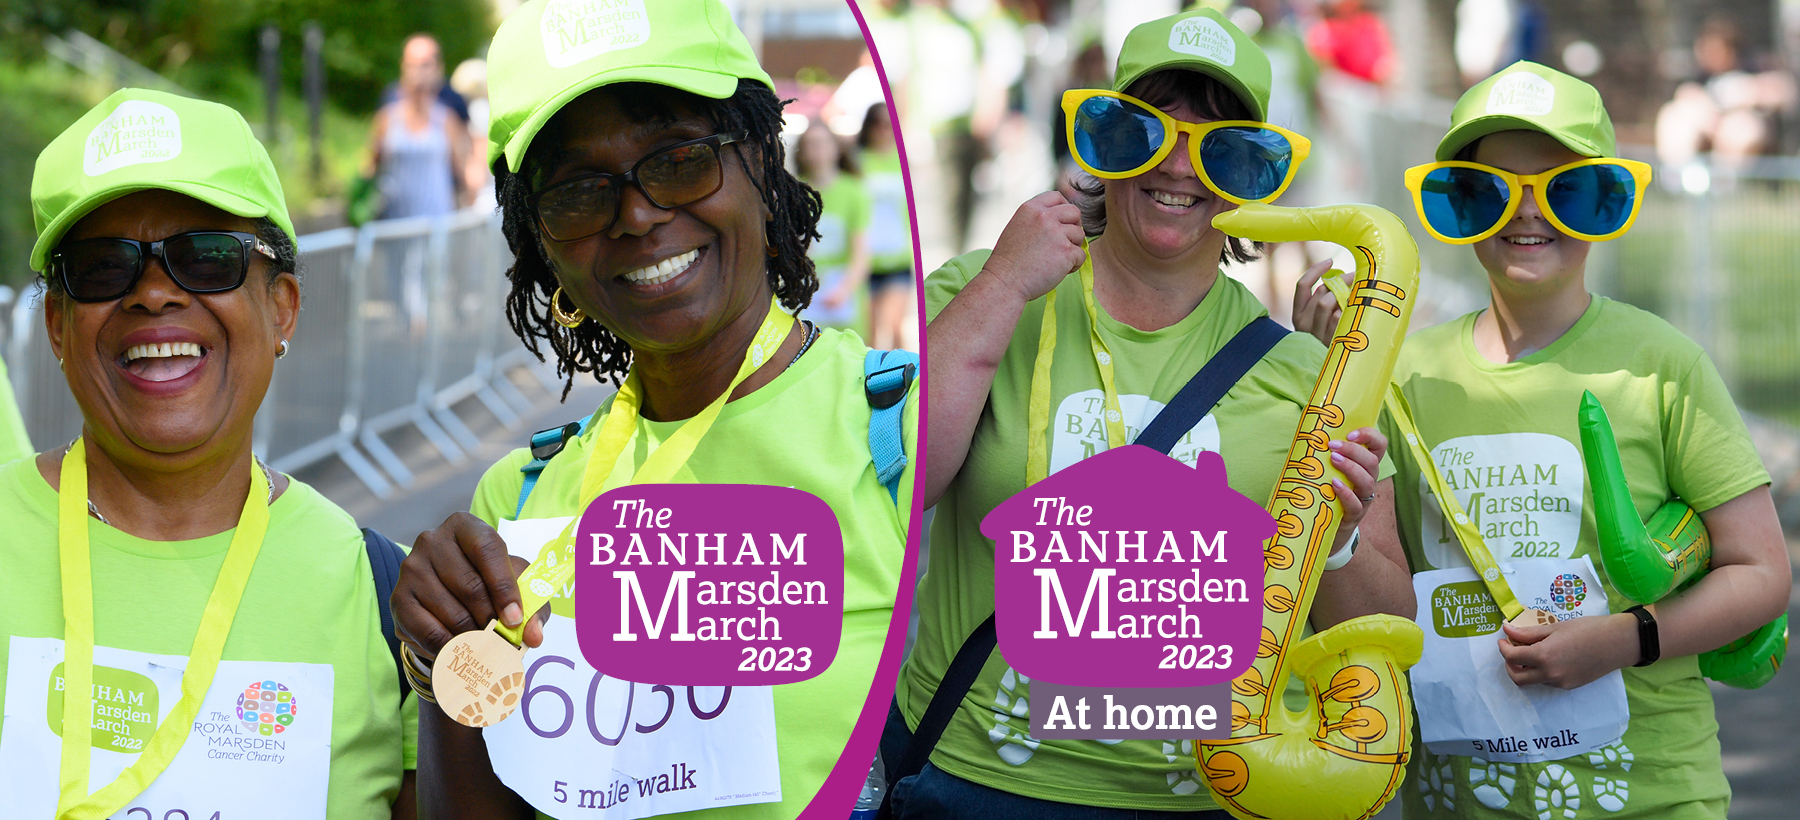 People smiling and taking part in the banham marsden march and The Banham Marsden March at home. Both logos are displayed on top of the photos. 